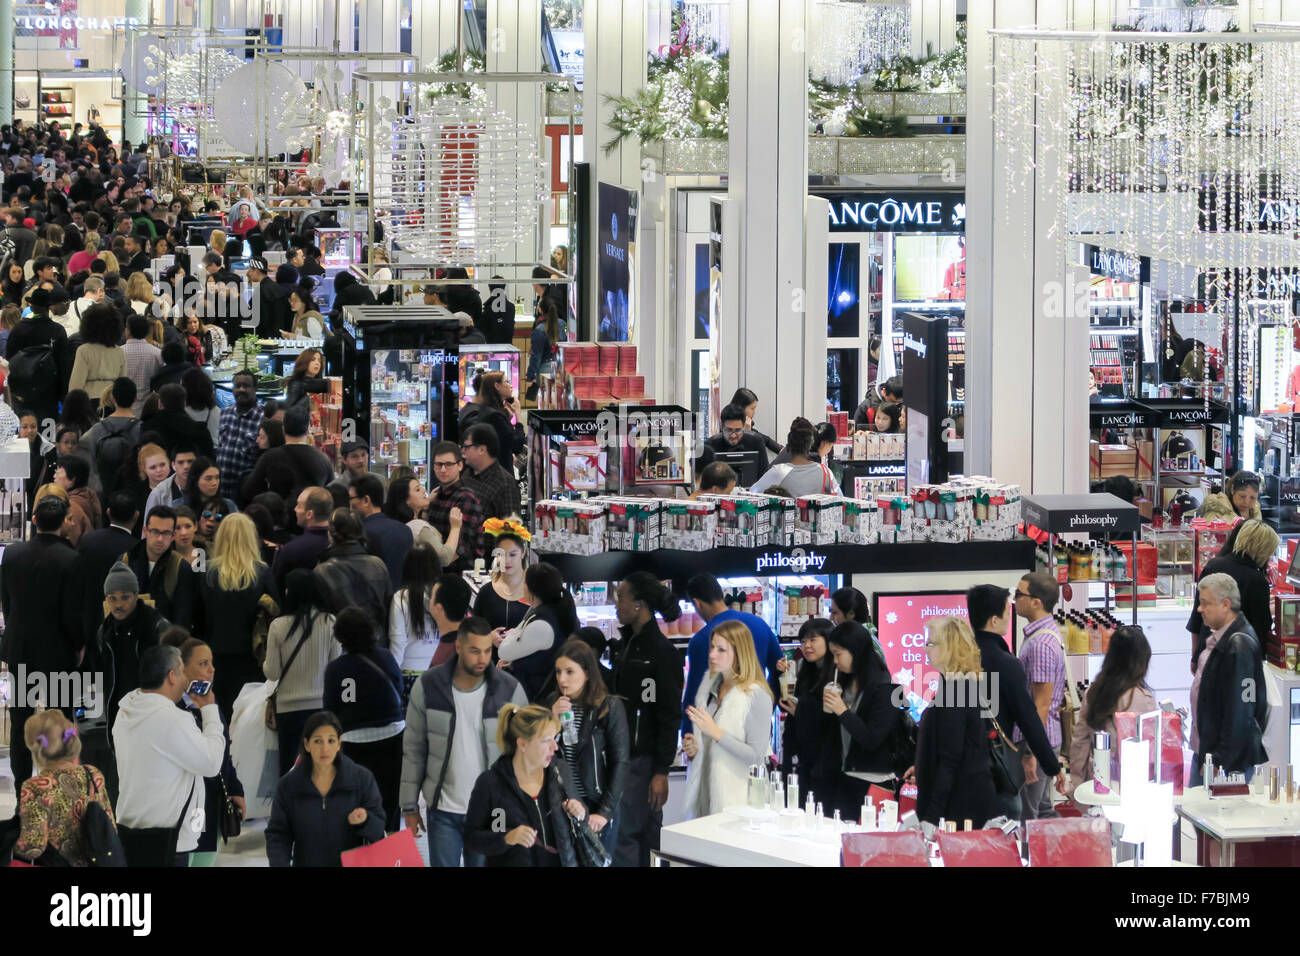 Crowds Shopping at Macy's Flagship Department Store in Herald Square on Black Friday, NYC Stock Photo